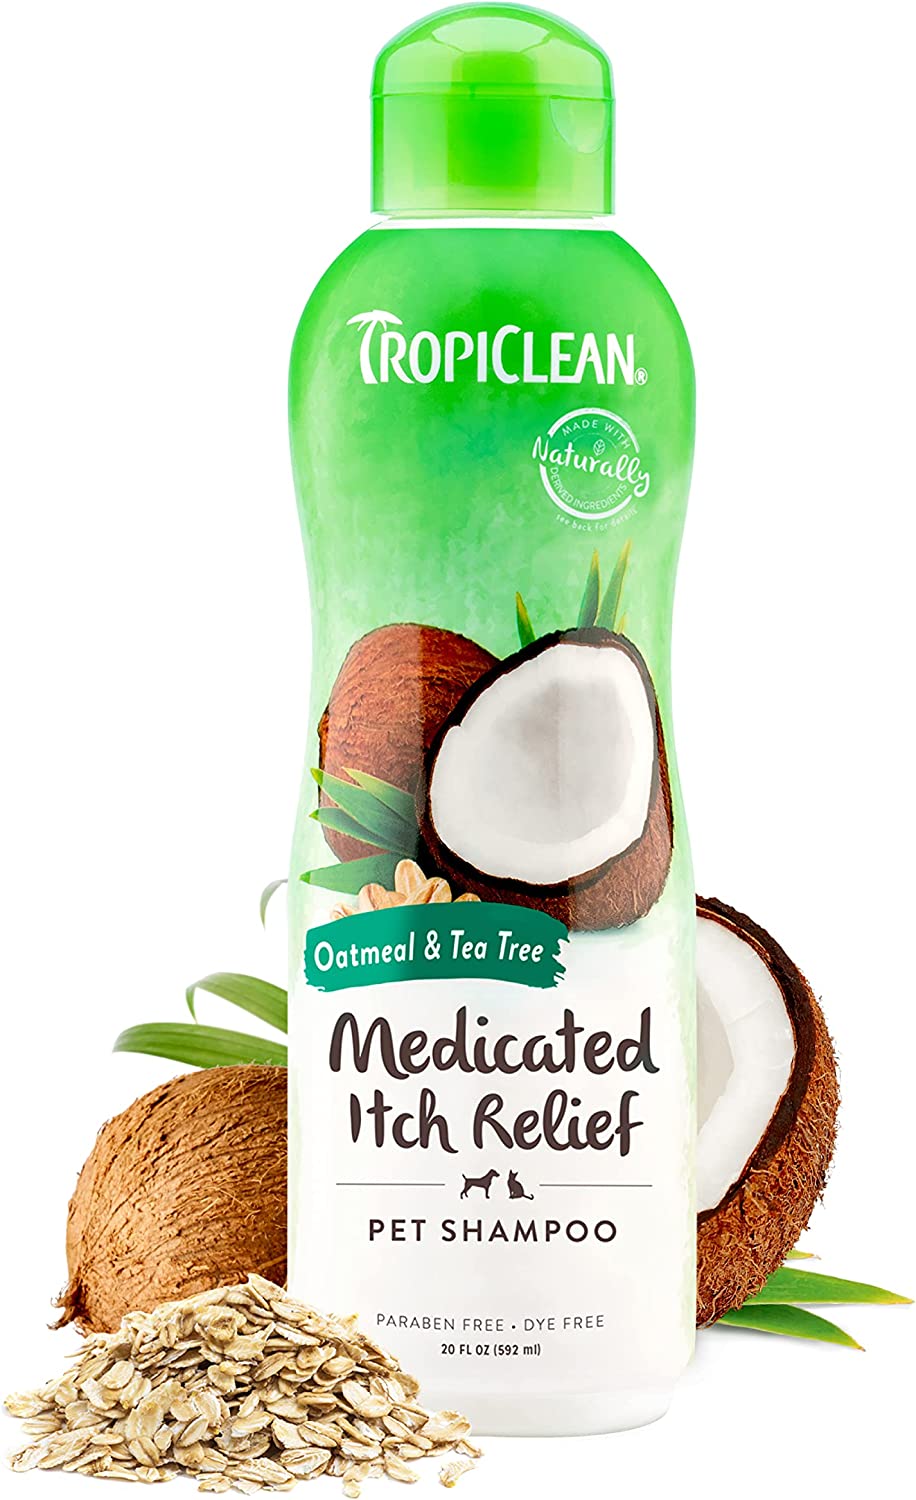 Tropiclean Medicated Itch Relief Pet Shampoo